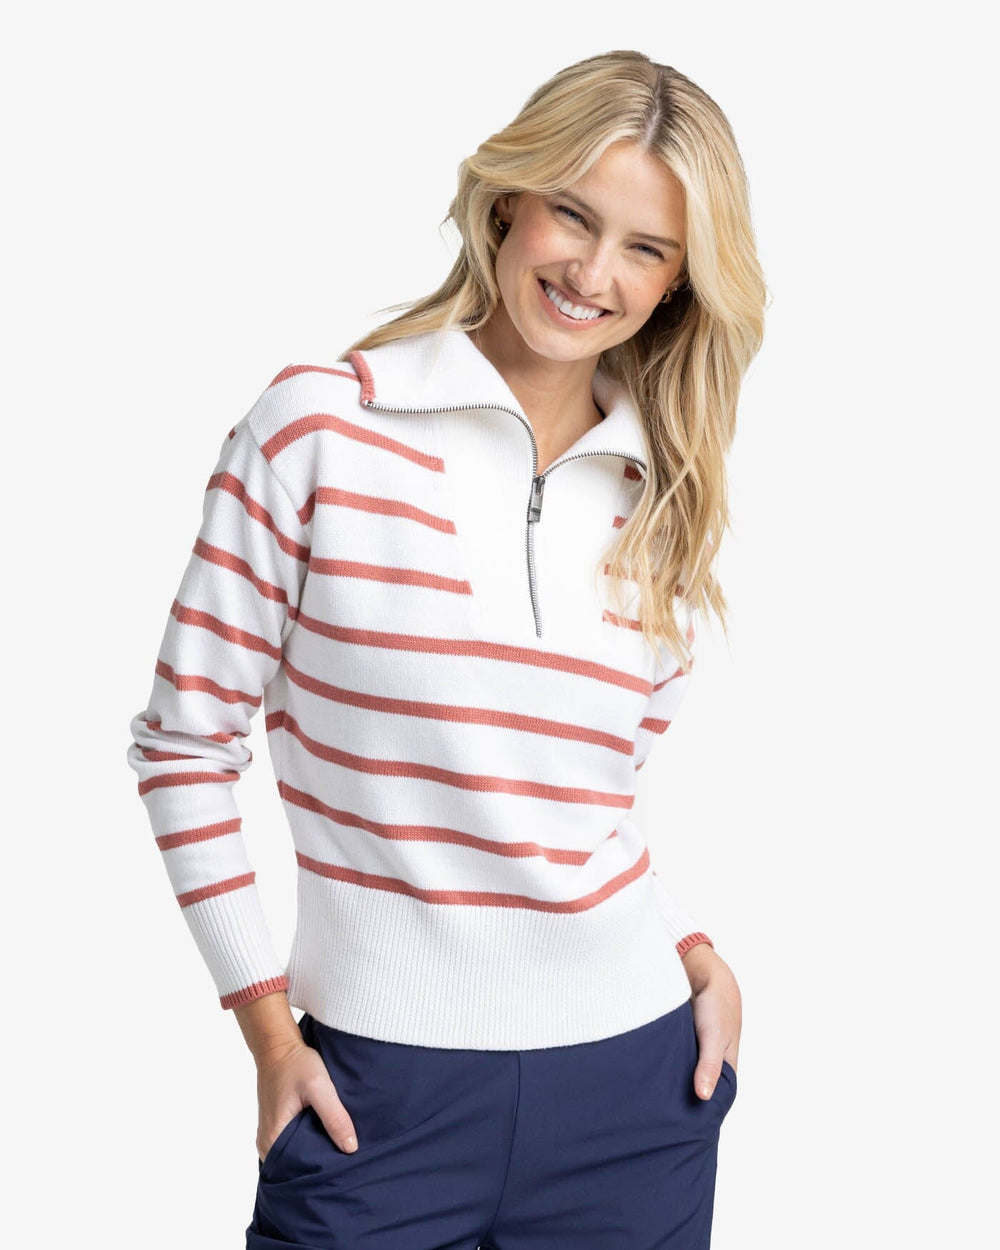 The front view of the Southern Tide Maizy Sweater by Southern Tide - Dusty Coral